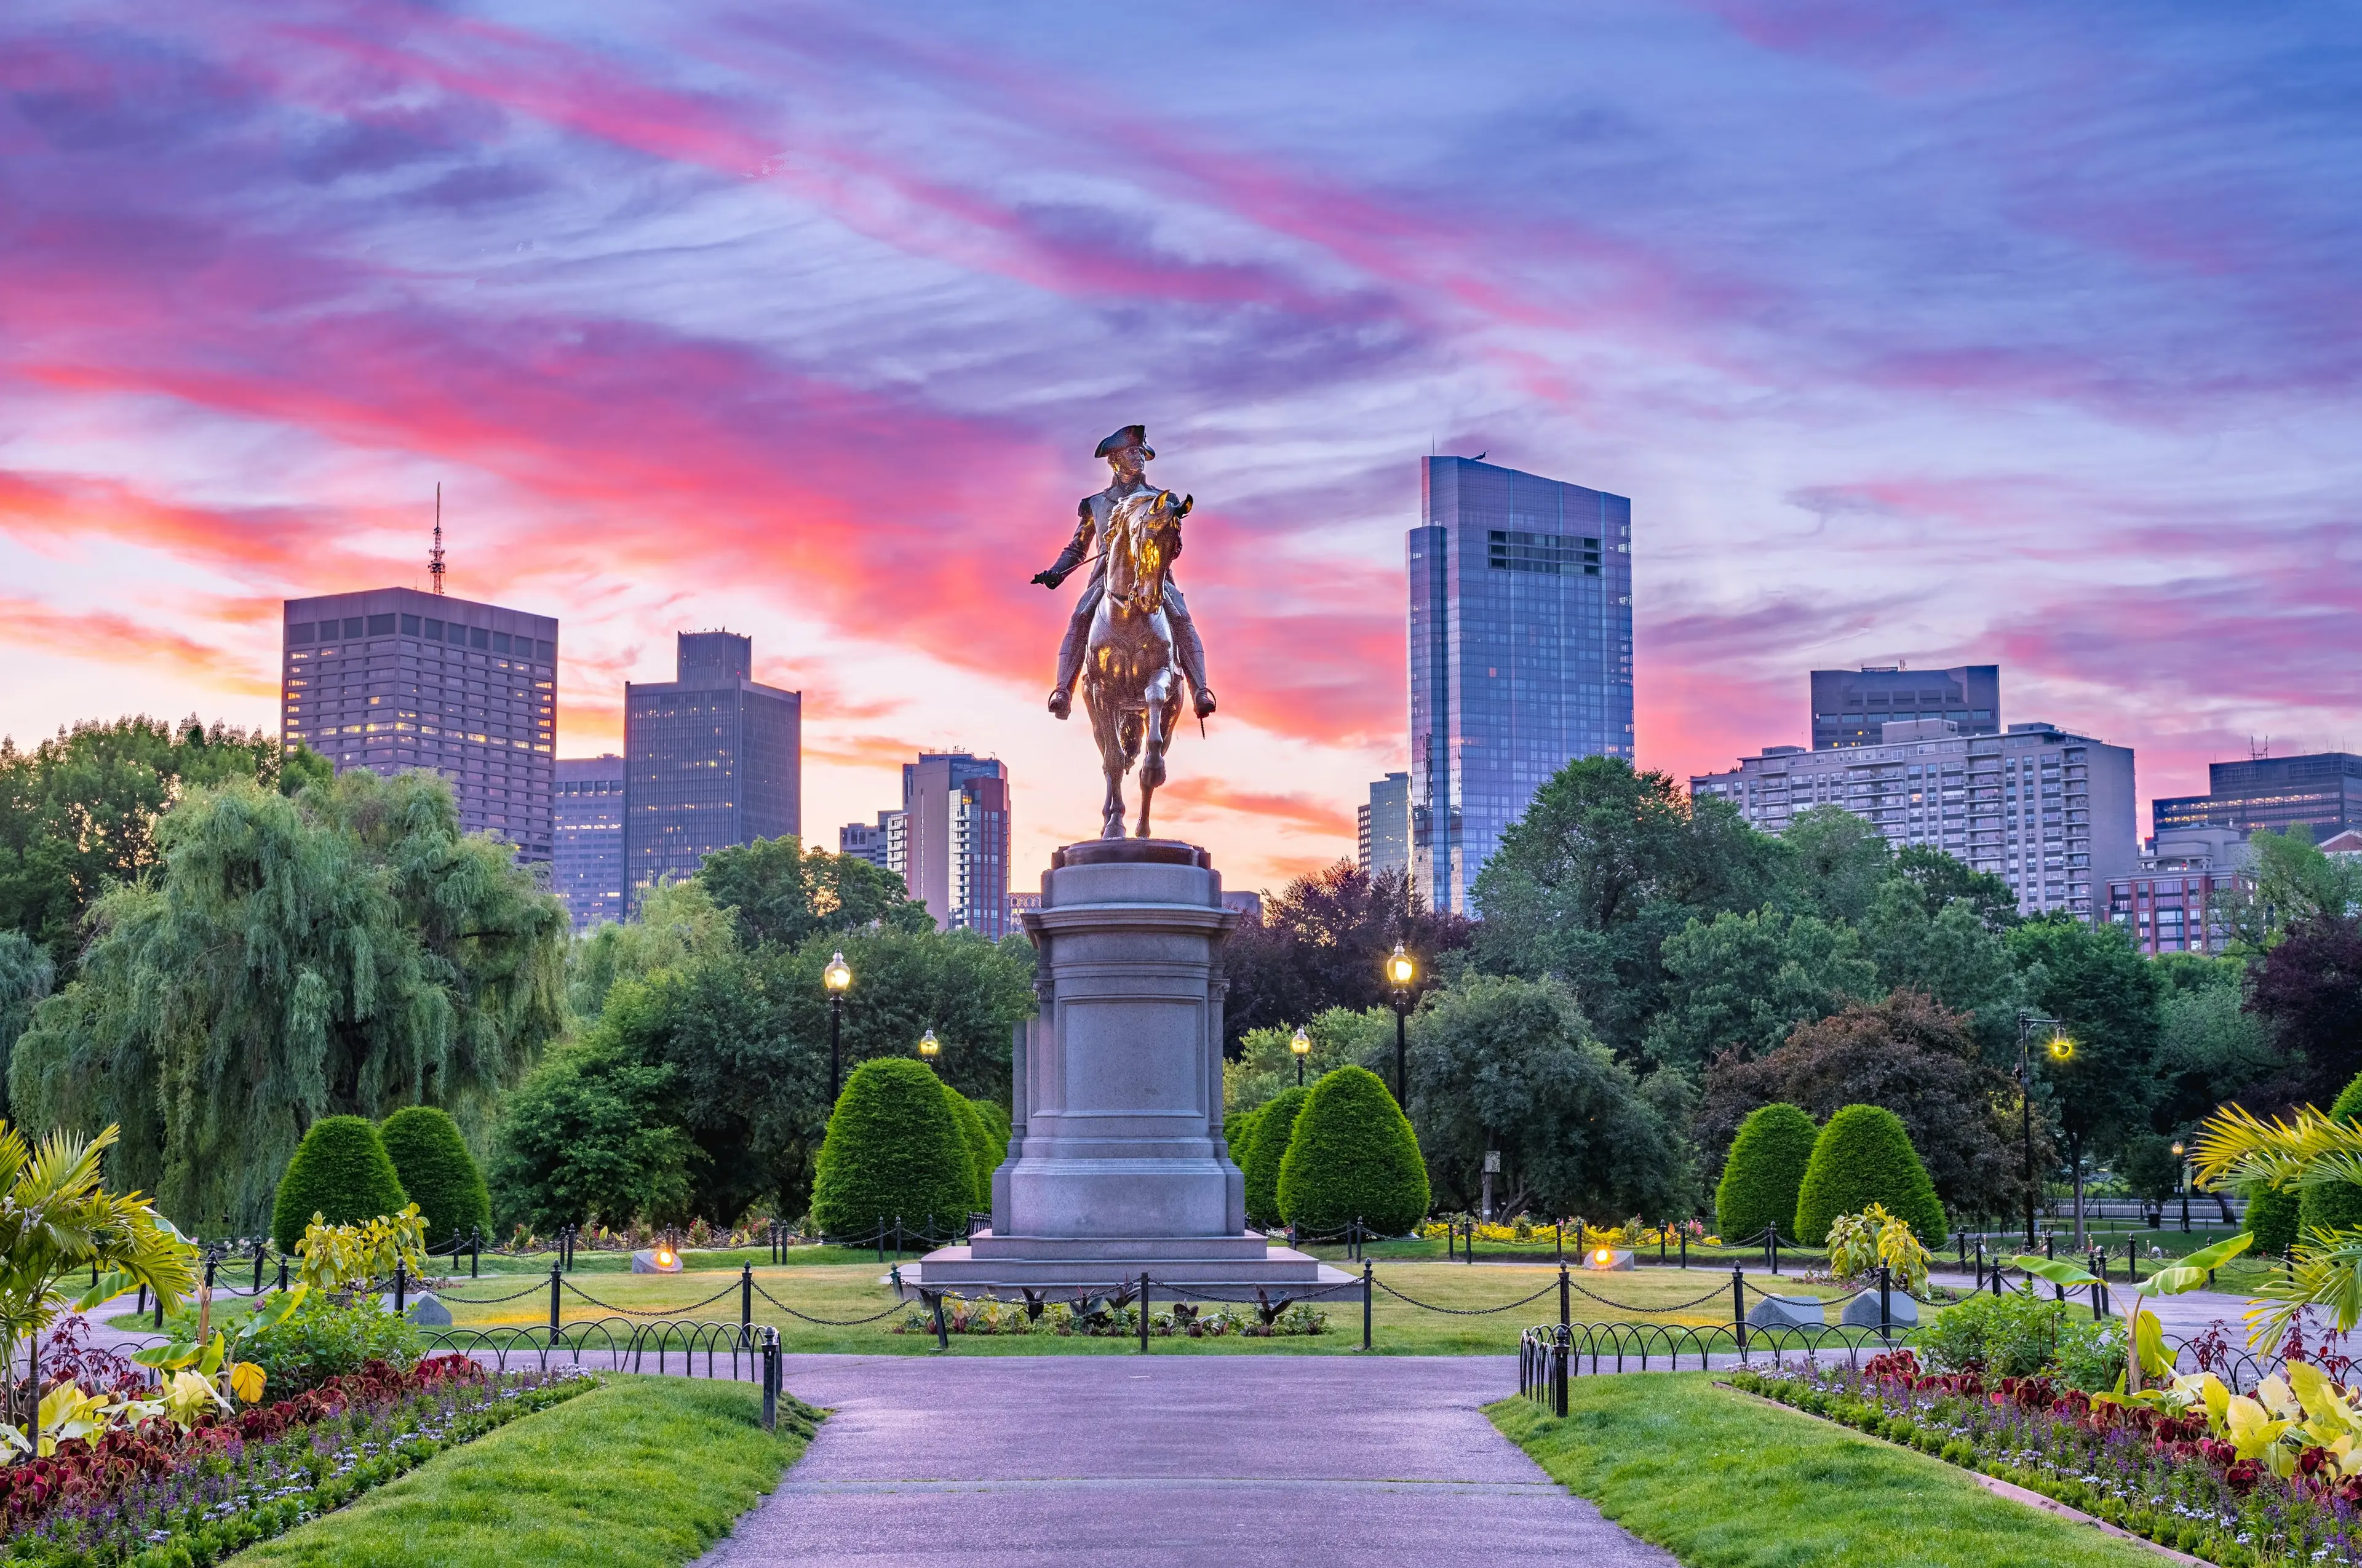 4-Day Boston Itinerary: Outdoor Adventure, Sightseeing & Shopping